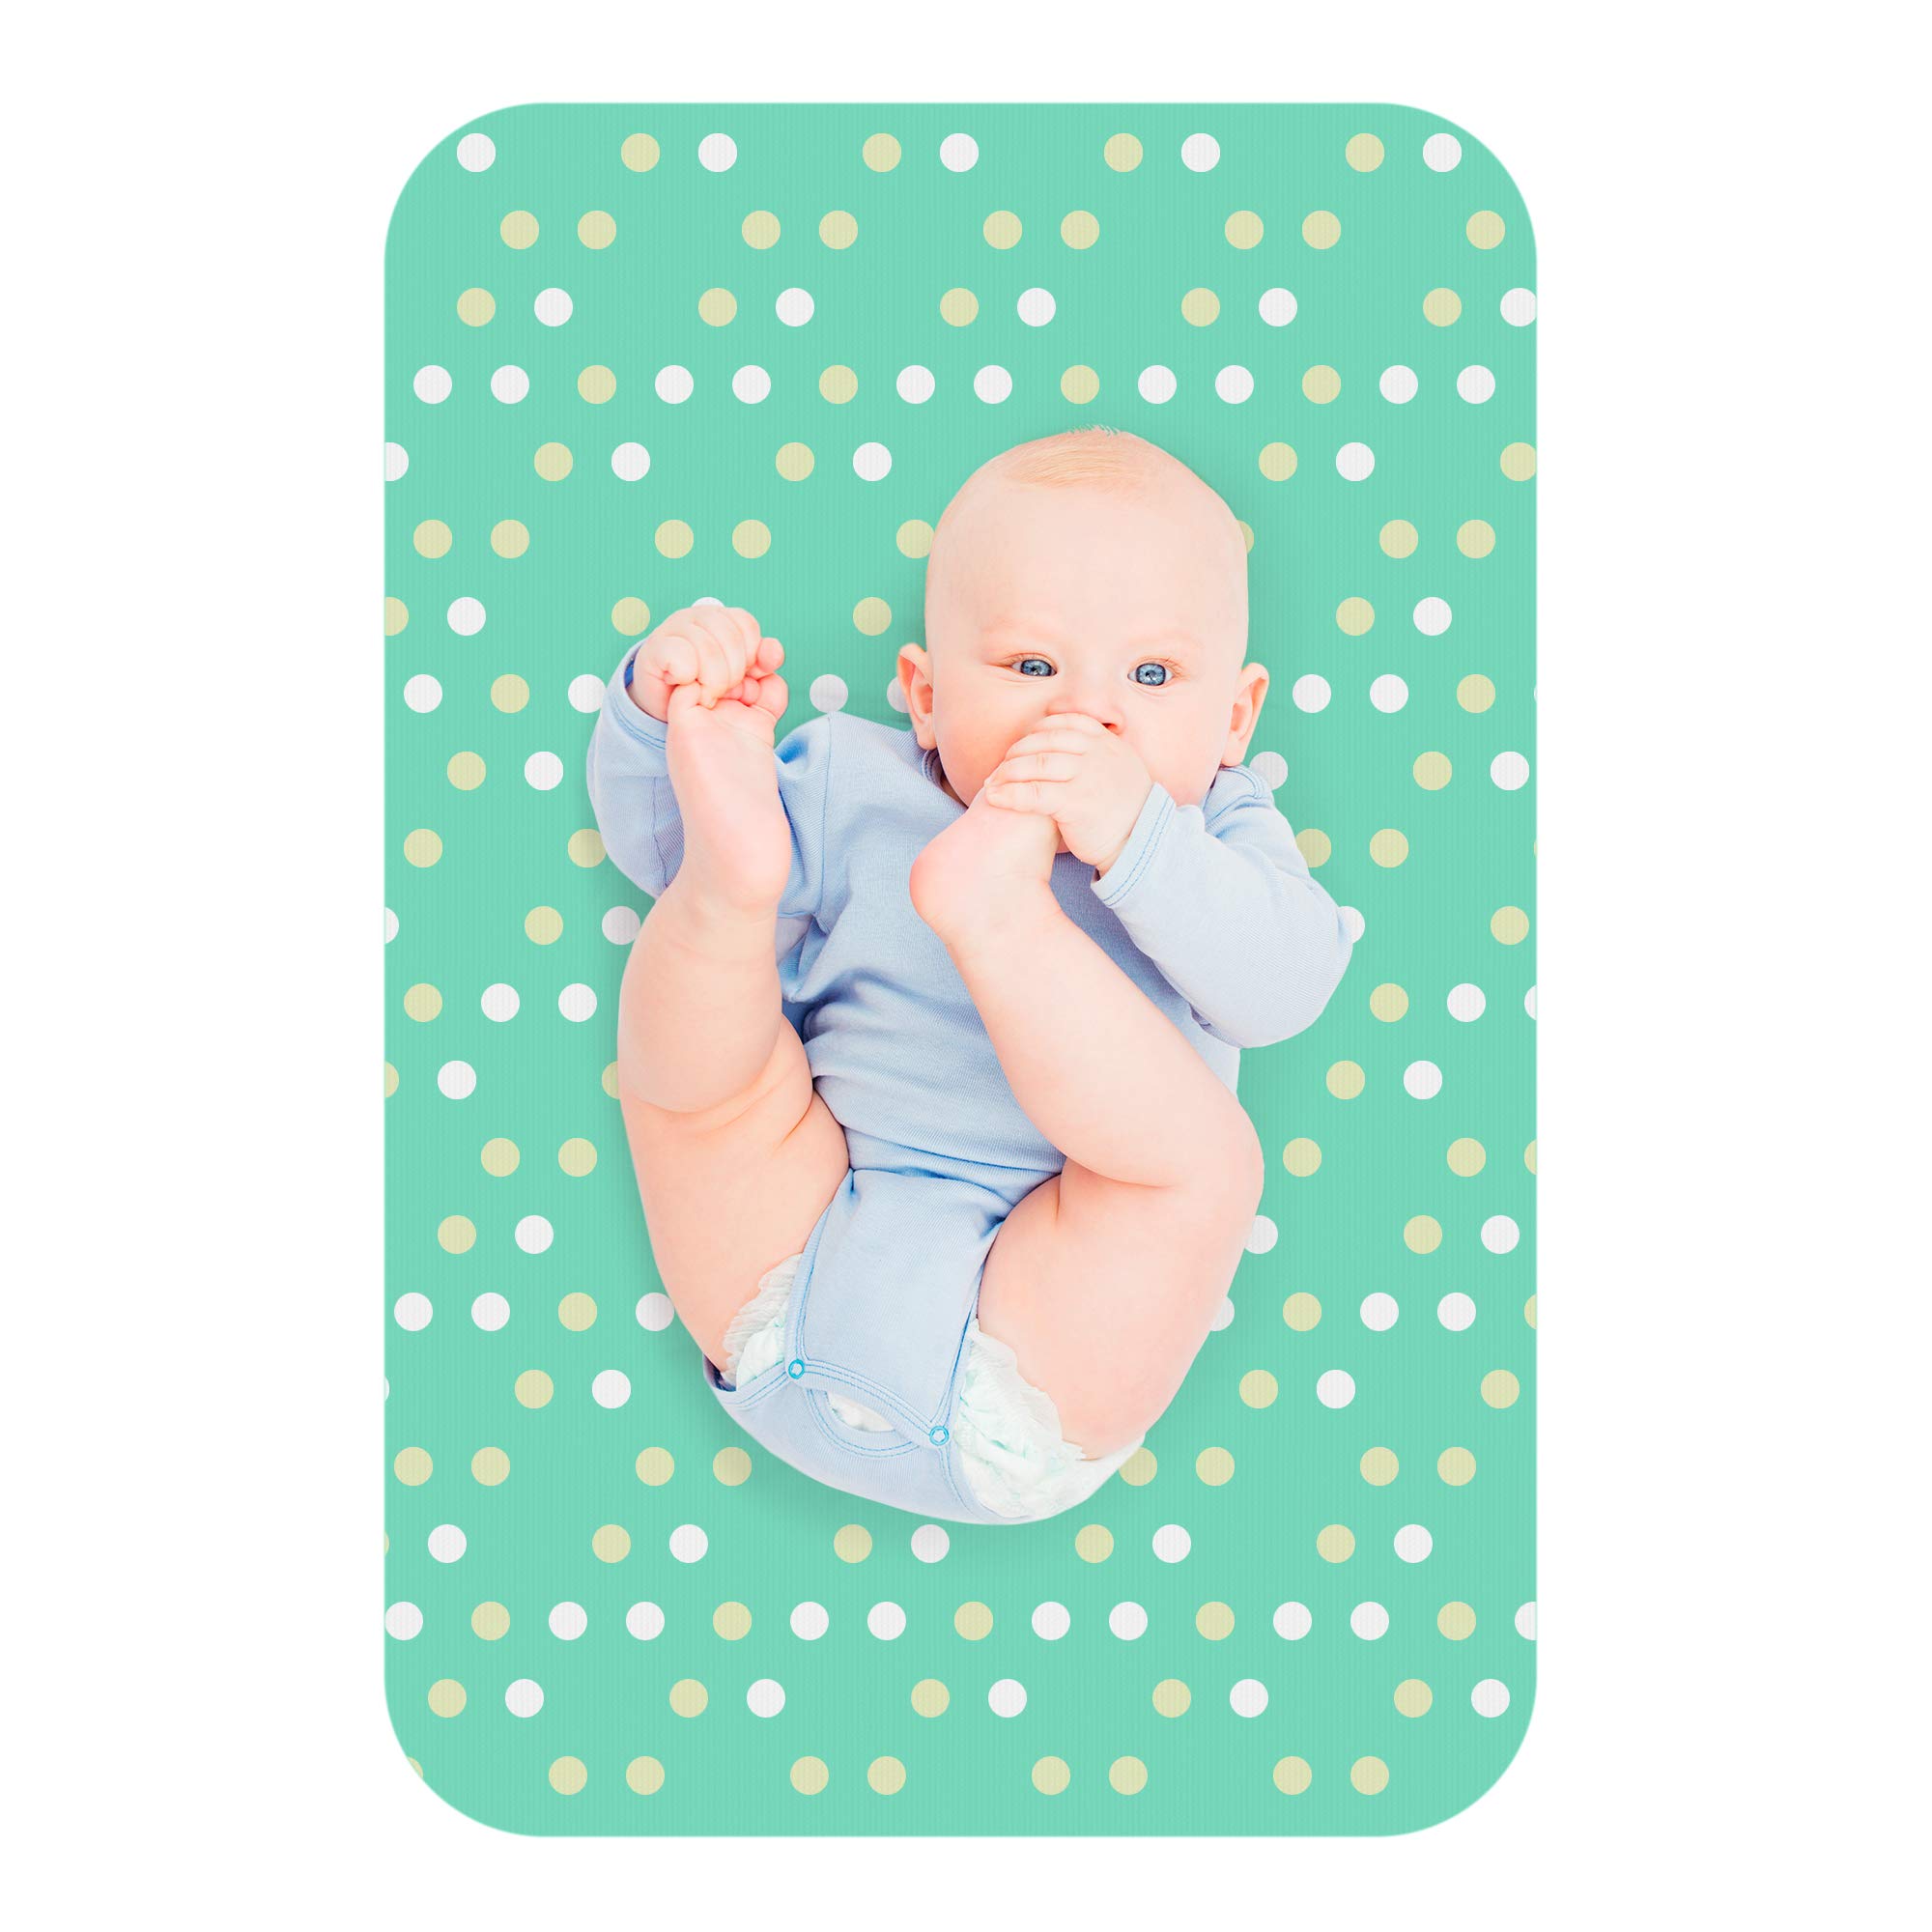 Lessy Messy-Waterproof Baby Diaper changing Mat: Portable changing Pad-The Only Diaper changing Mat That is Washable at high tem